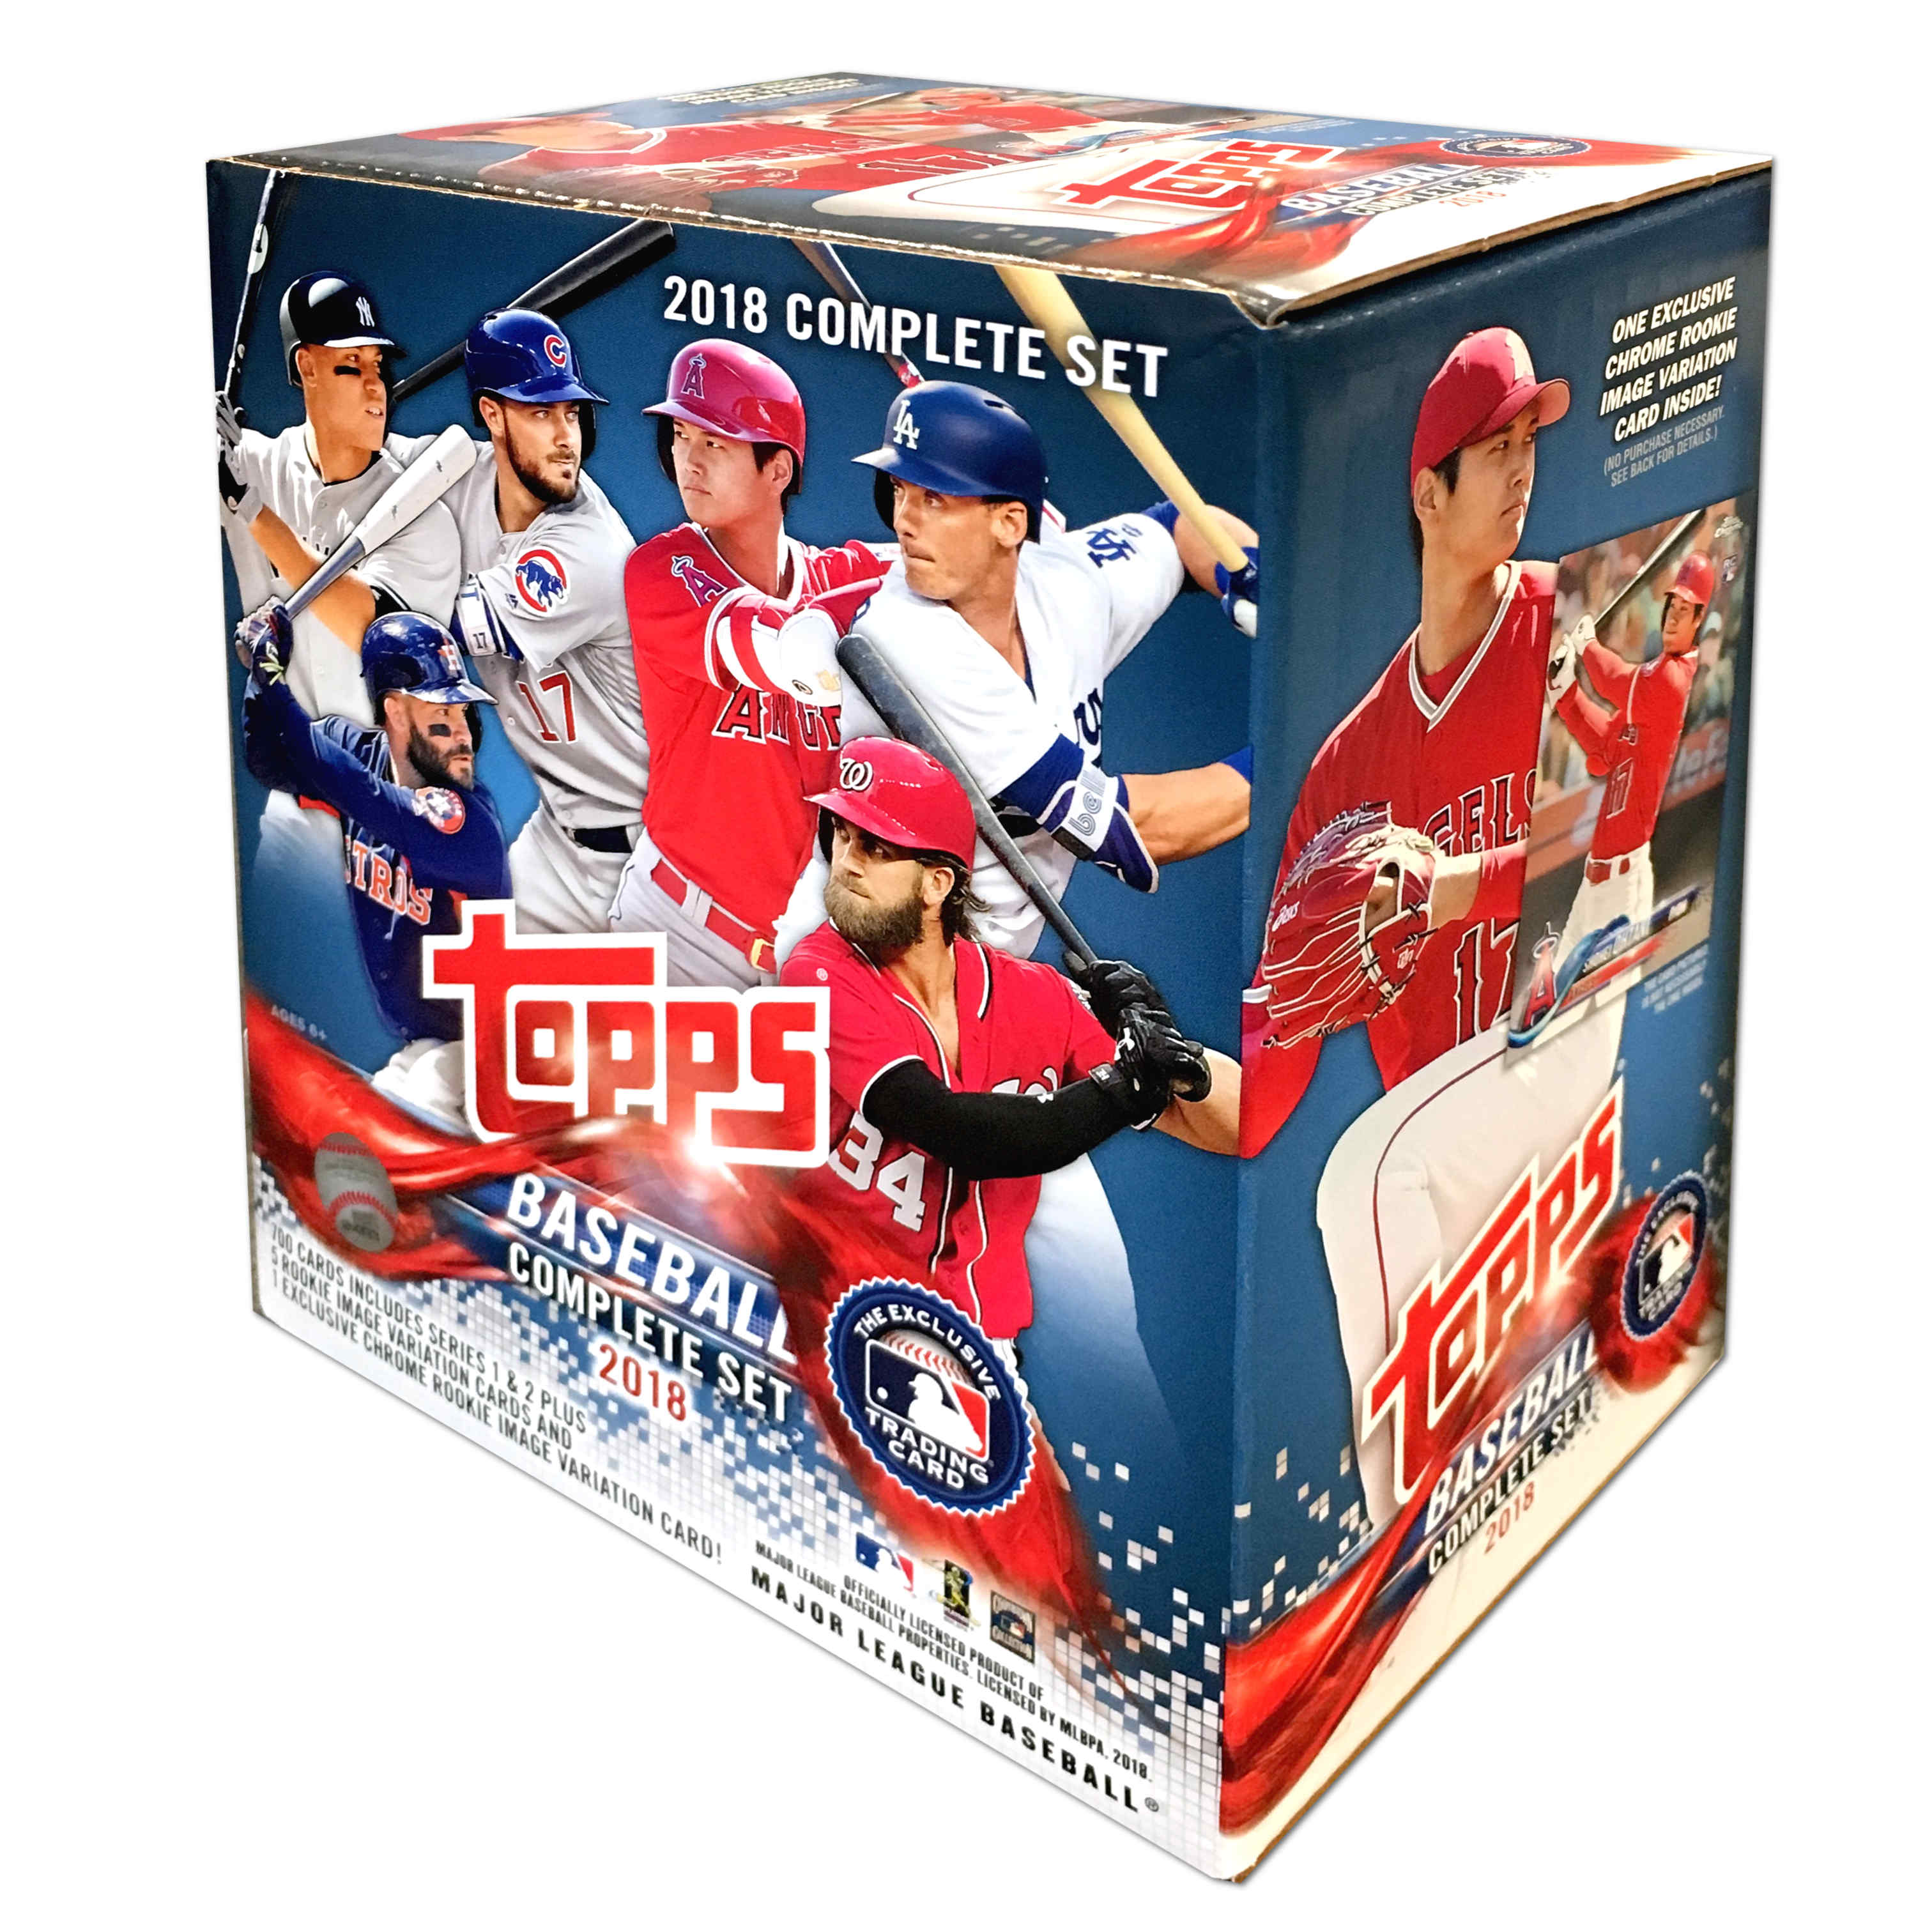 2018 Topps MLB Baseball Complete Set Special Edition Trading Cards- Rookies include Ronald Acuna Jr, Juan Soto, Shohei Ohtani - image 1 of 2